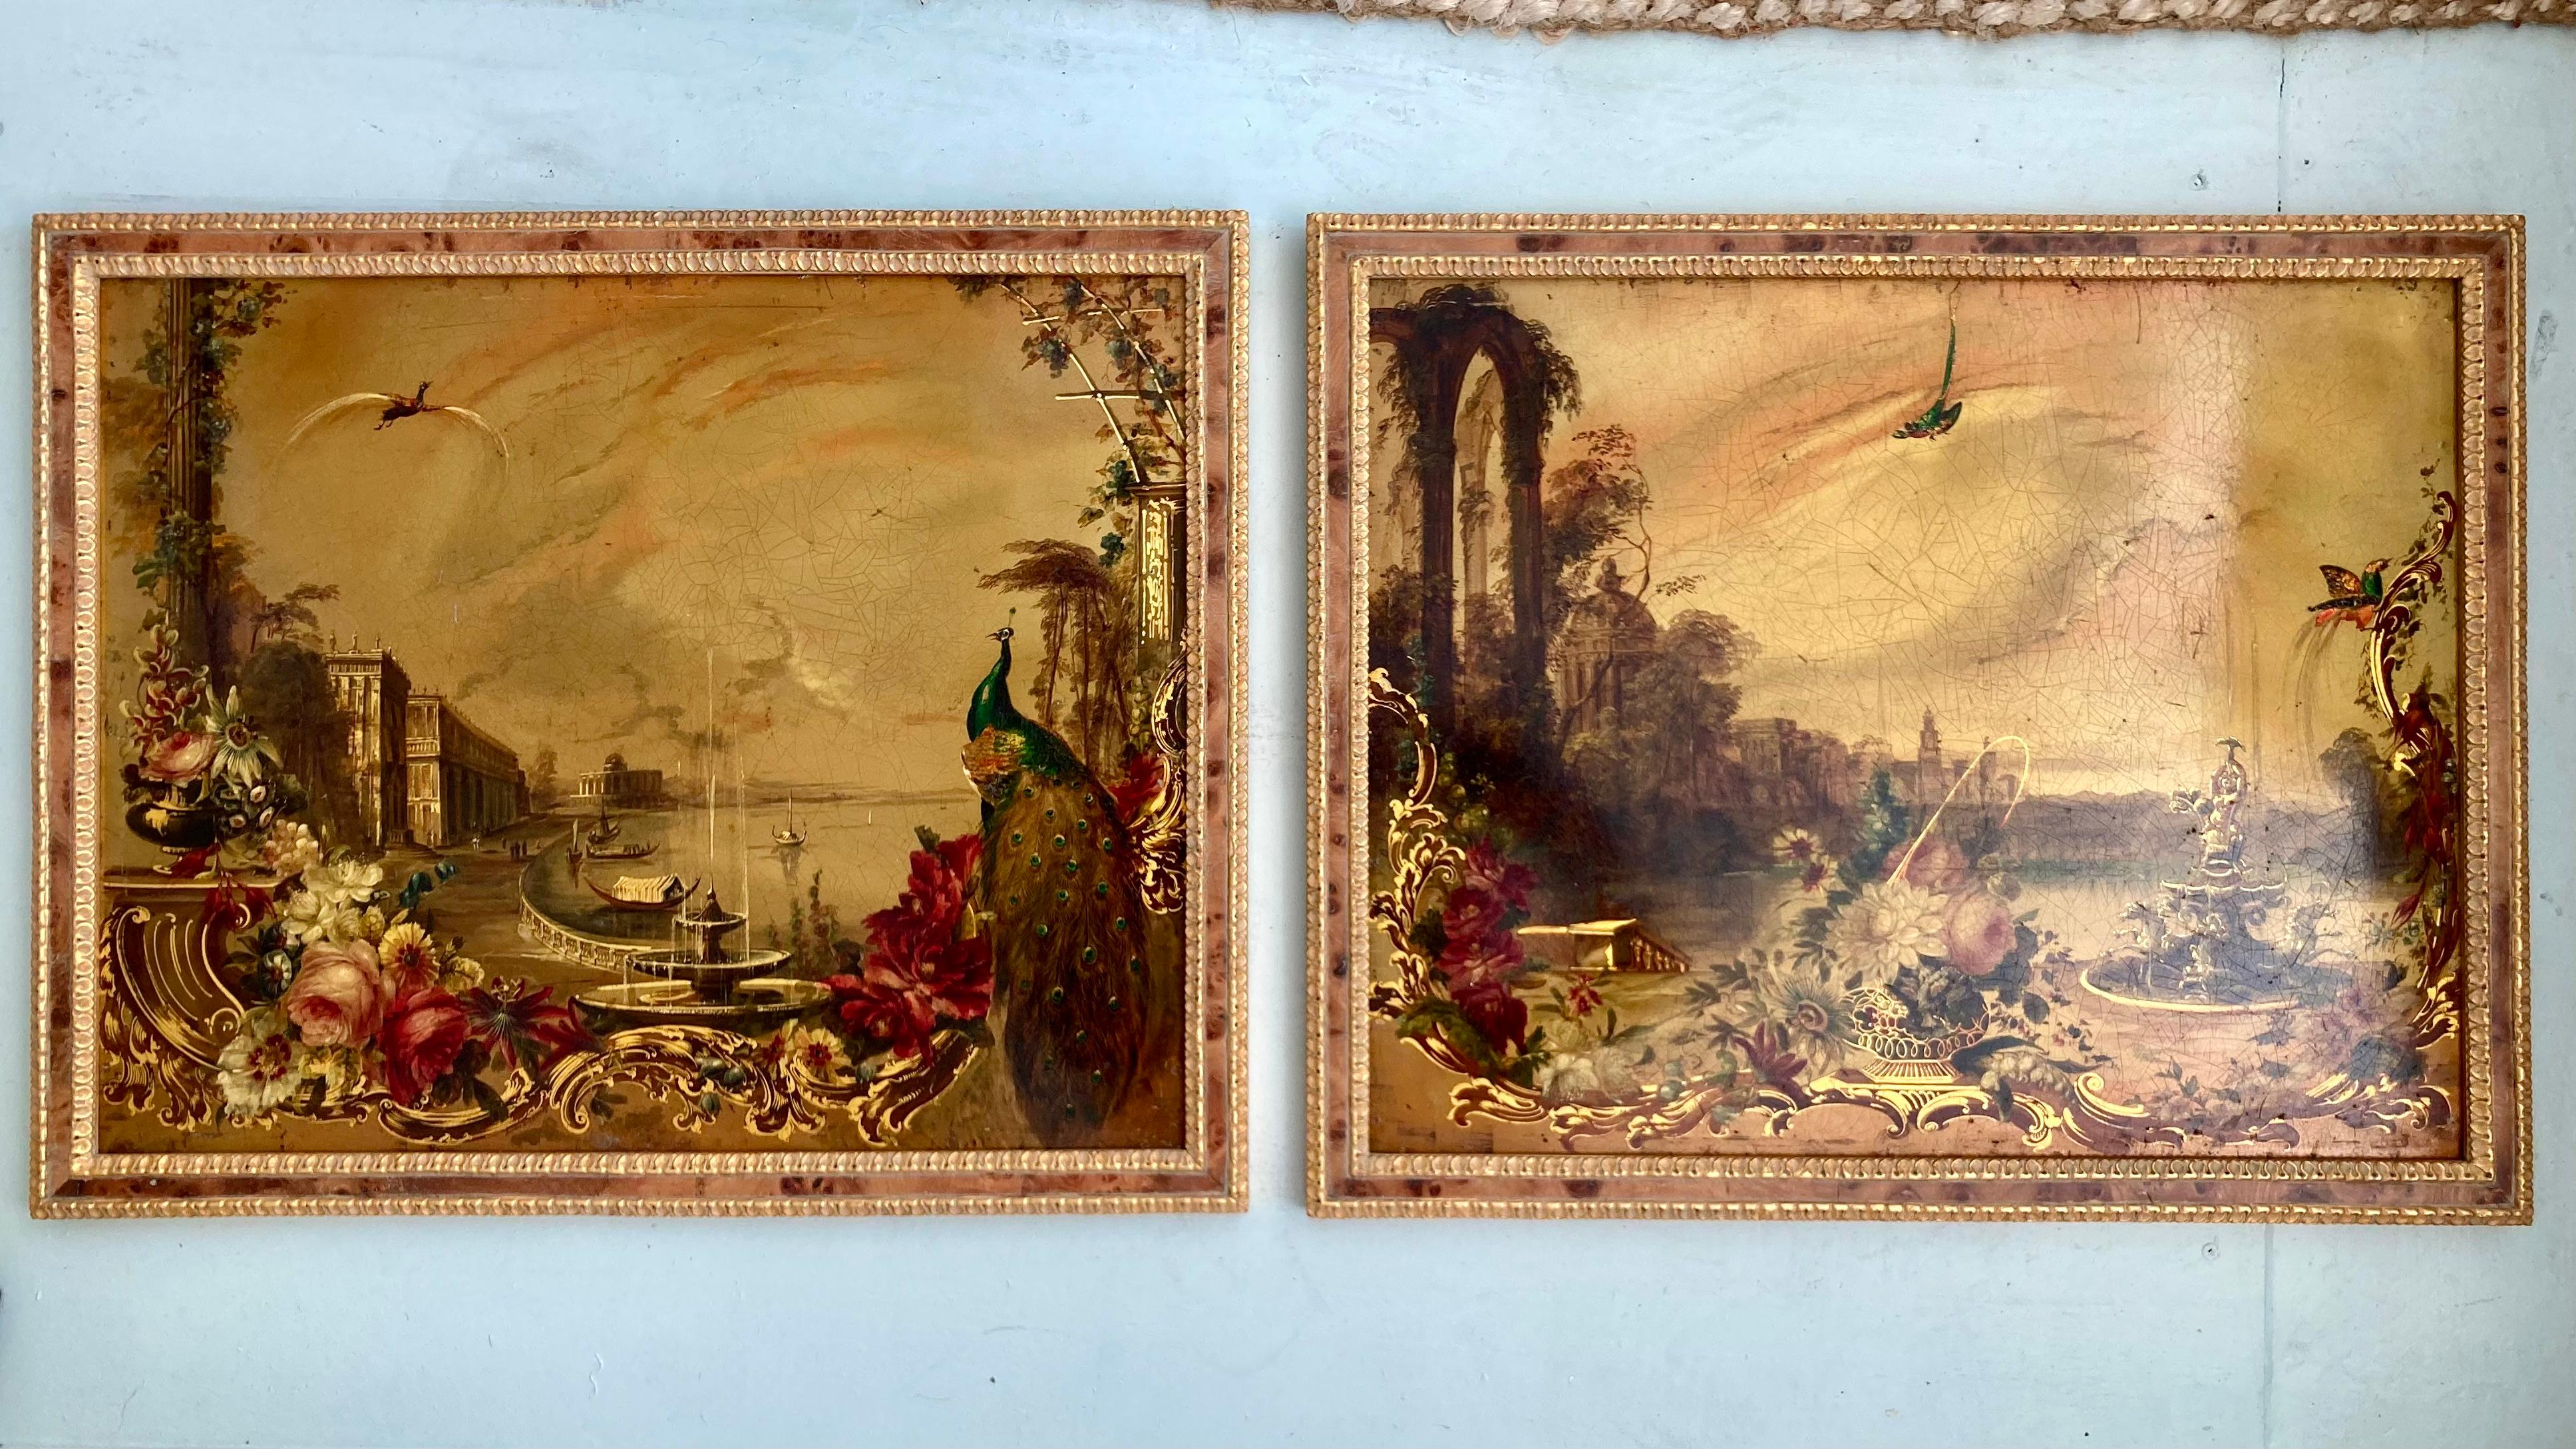 Pair of beautiful Jennens and Bettridge 19th Century paintings. Floral and fauna details on both paintings make these a lovelily pair. Both paintings are framed the same and highlight the paintings details.

Sight view: 21.5